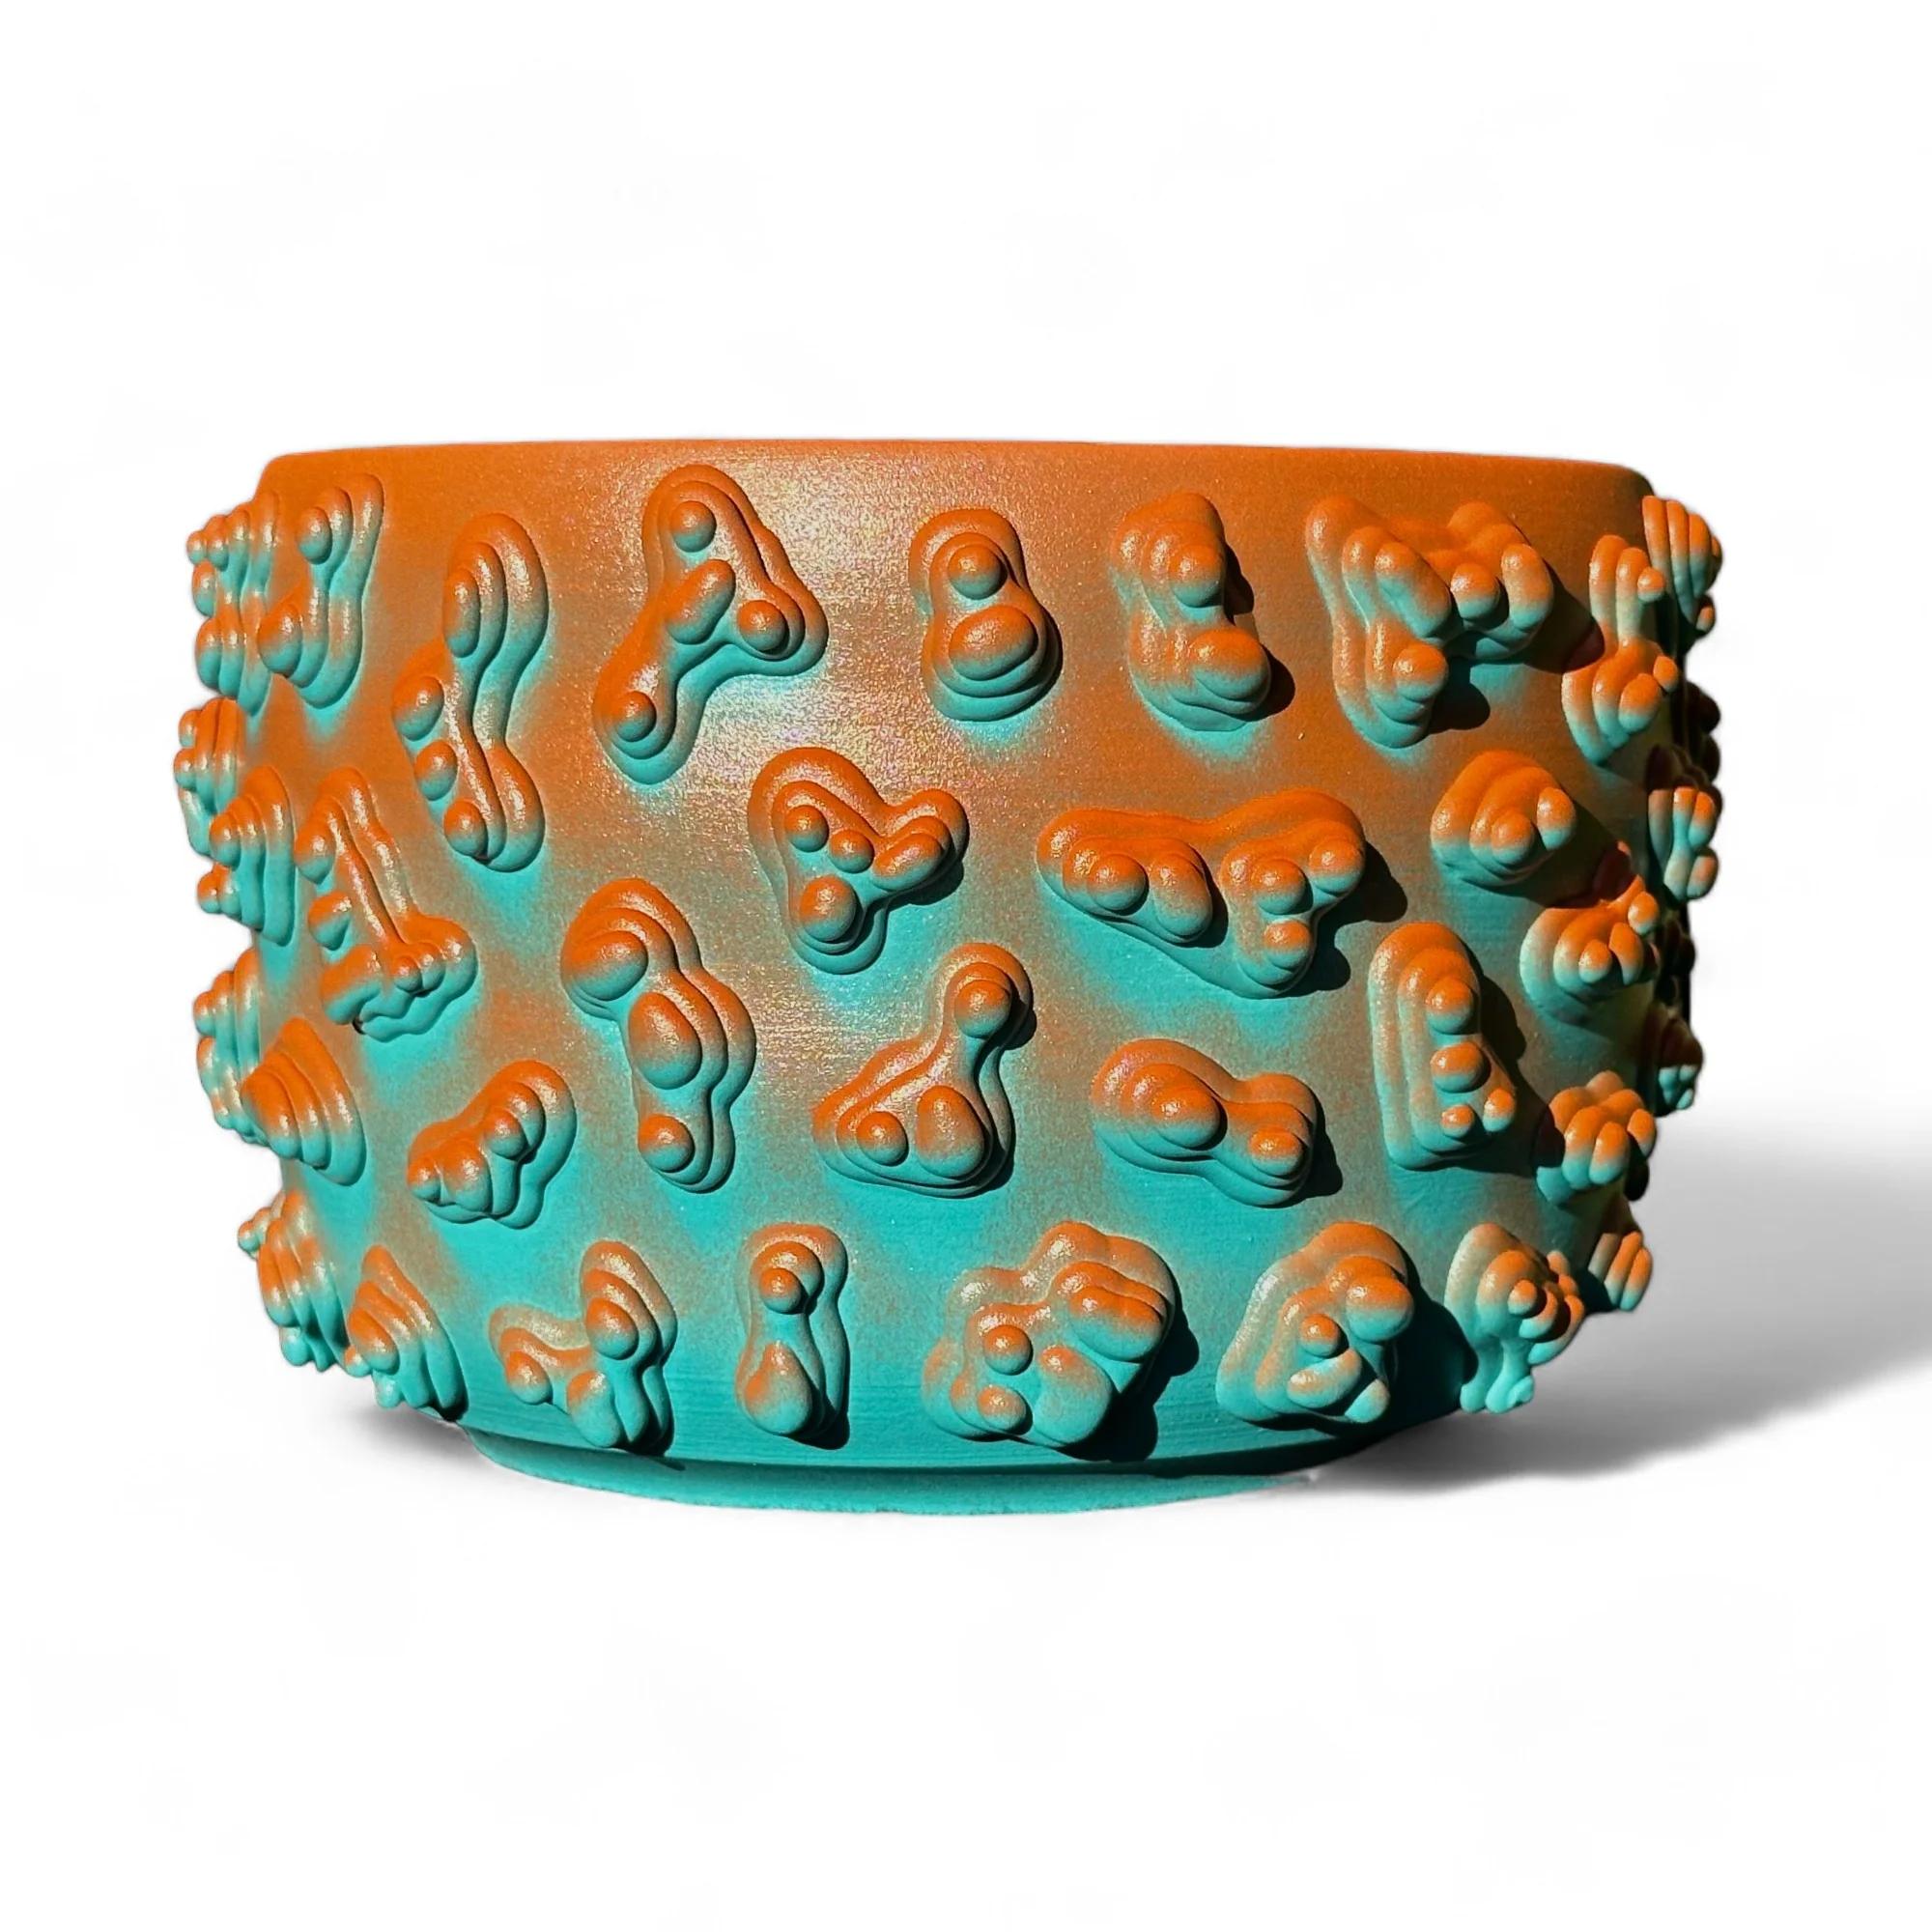 American Large Orange And Teal Amoeba Ombre Planter